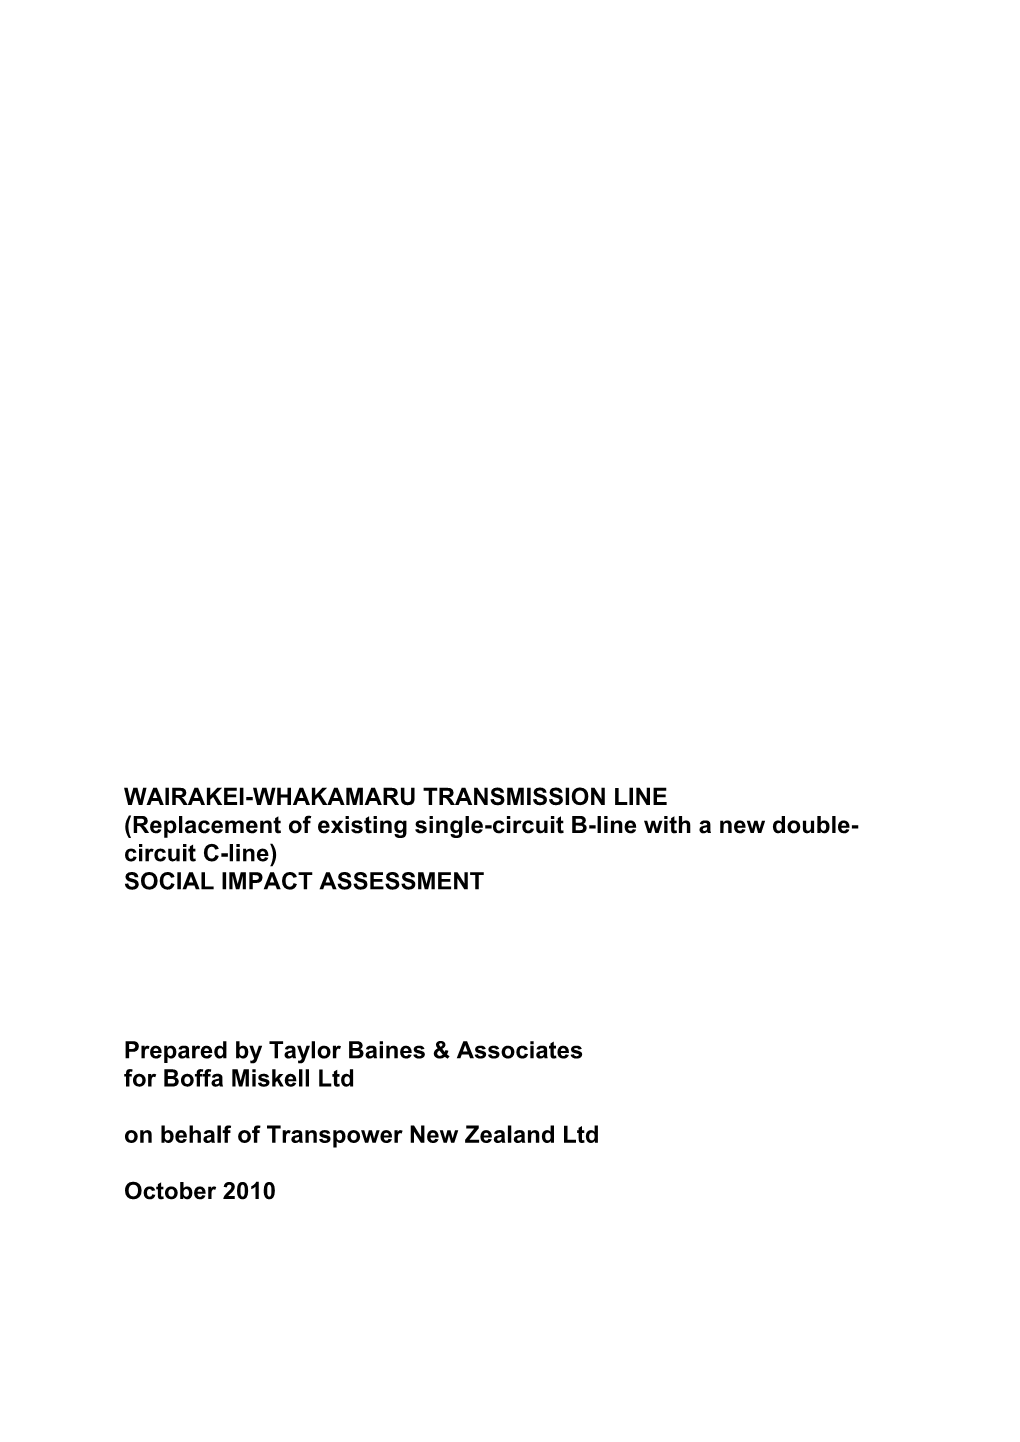 WAIRAKEI-WHAKAMARU TRANSMISSION LINE (Replacement of Existing Single-Circuit B-Line with a New Double- Circuit C-Line) SOCIAL IMPACT ASSESSMENT